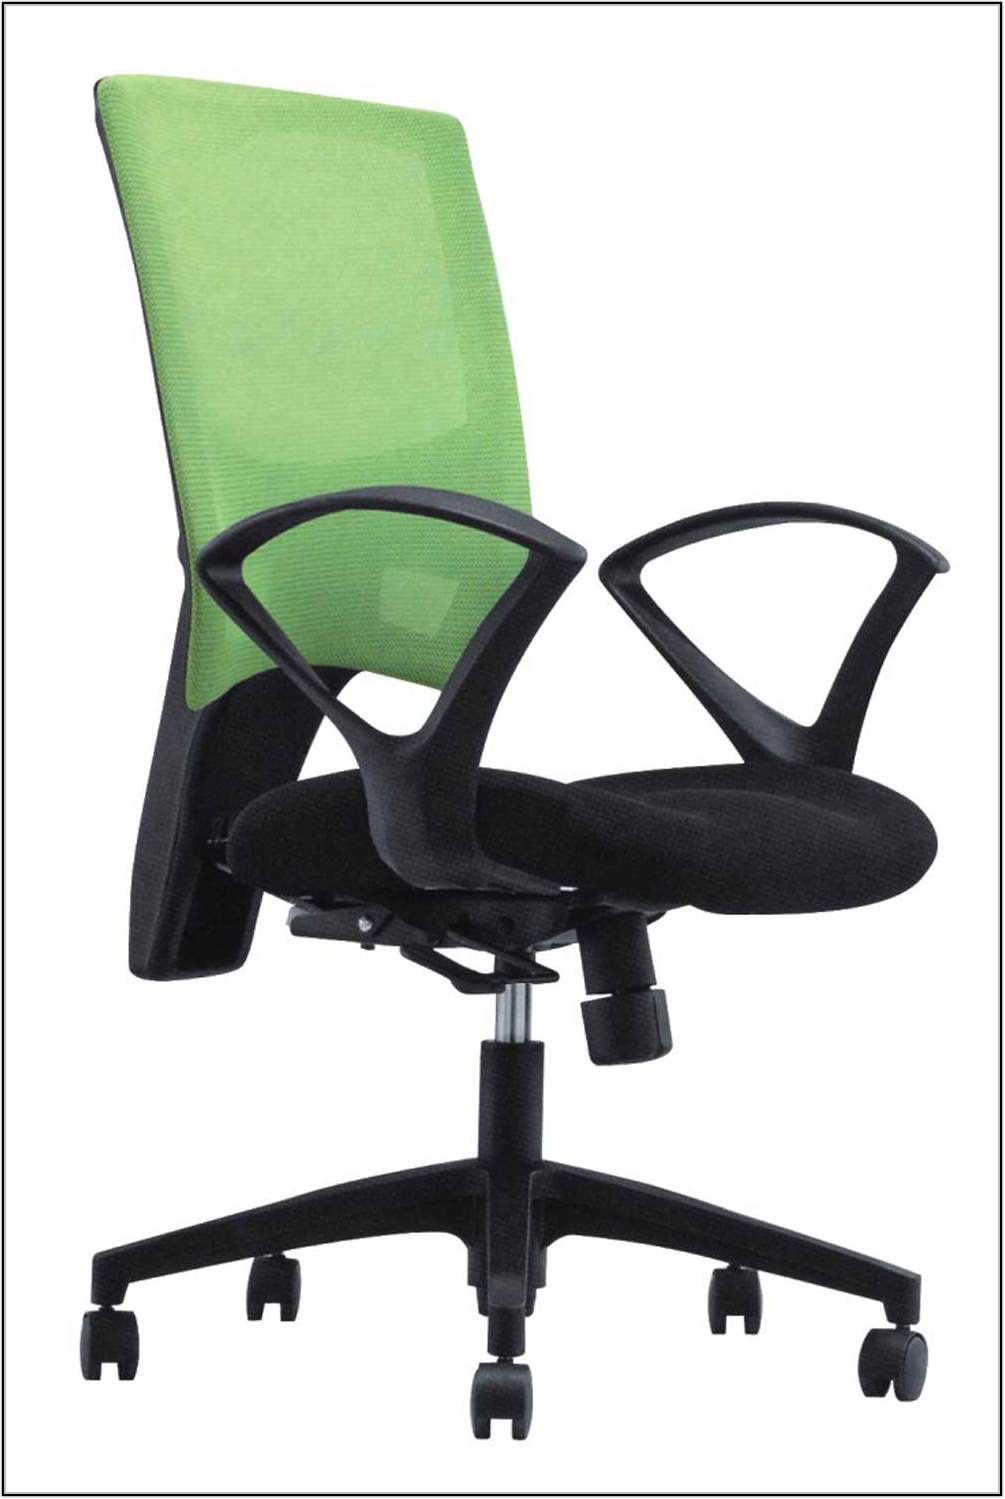 Ikea Office Chair Hack - Chairs : Home Design Ideas #75zPevan9385